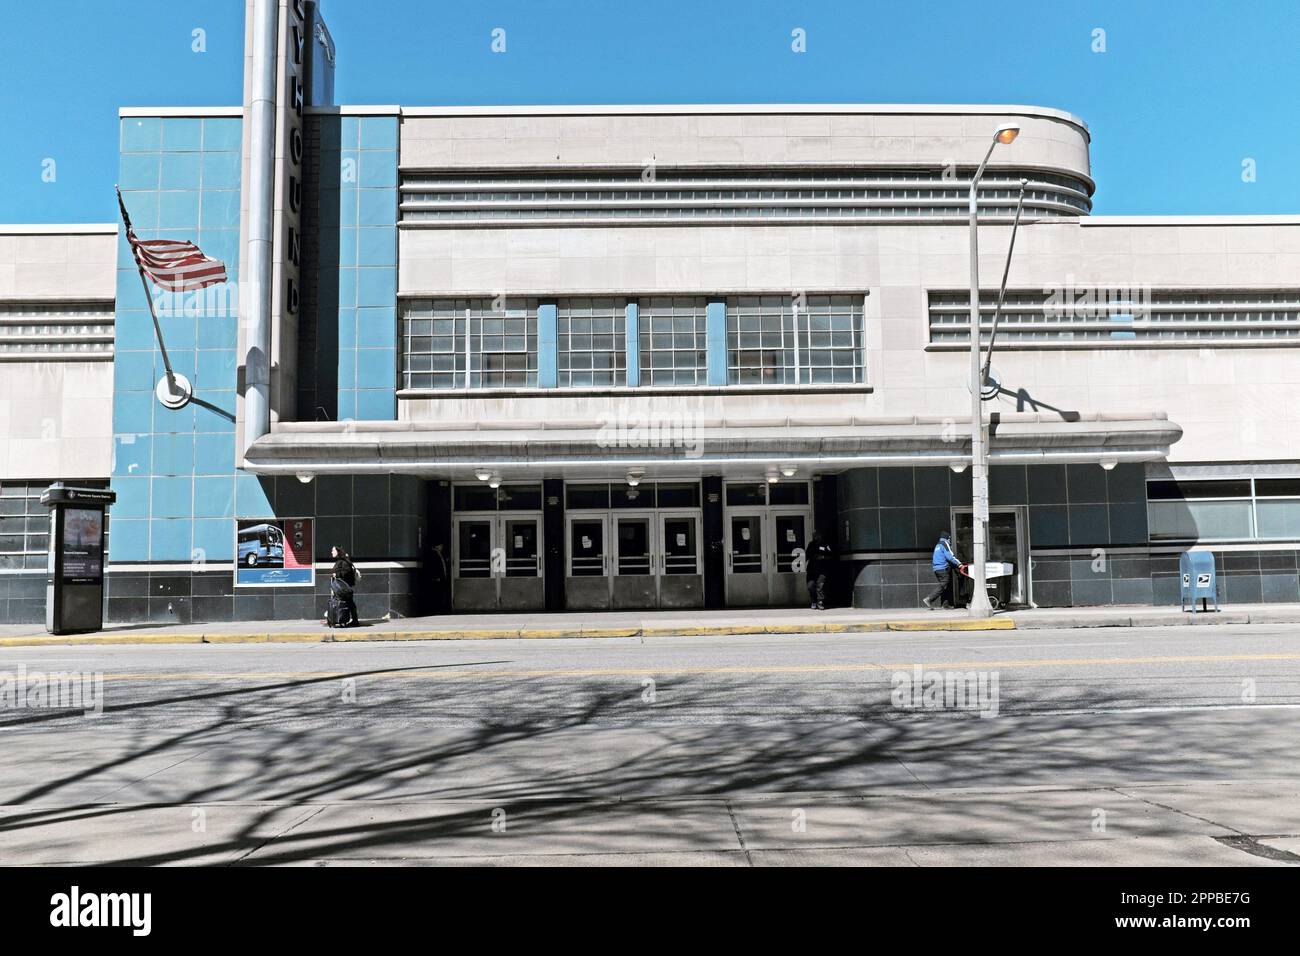 Opened in 1948, the downtown Cleveland Greyhound Bus Terminal Station, designed by architect William Strudwick Arrasmith, has become an iconic architectural masterpiece reflecting streamline modernism architecture.  The station, located on Chester Avenue, is just east of downtown providing accessibility for the growing downtown population. Stock Photo